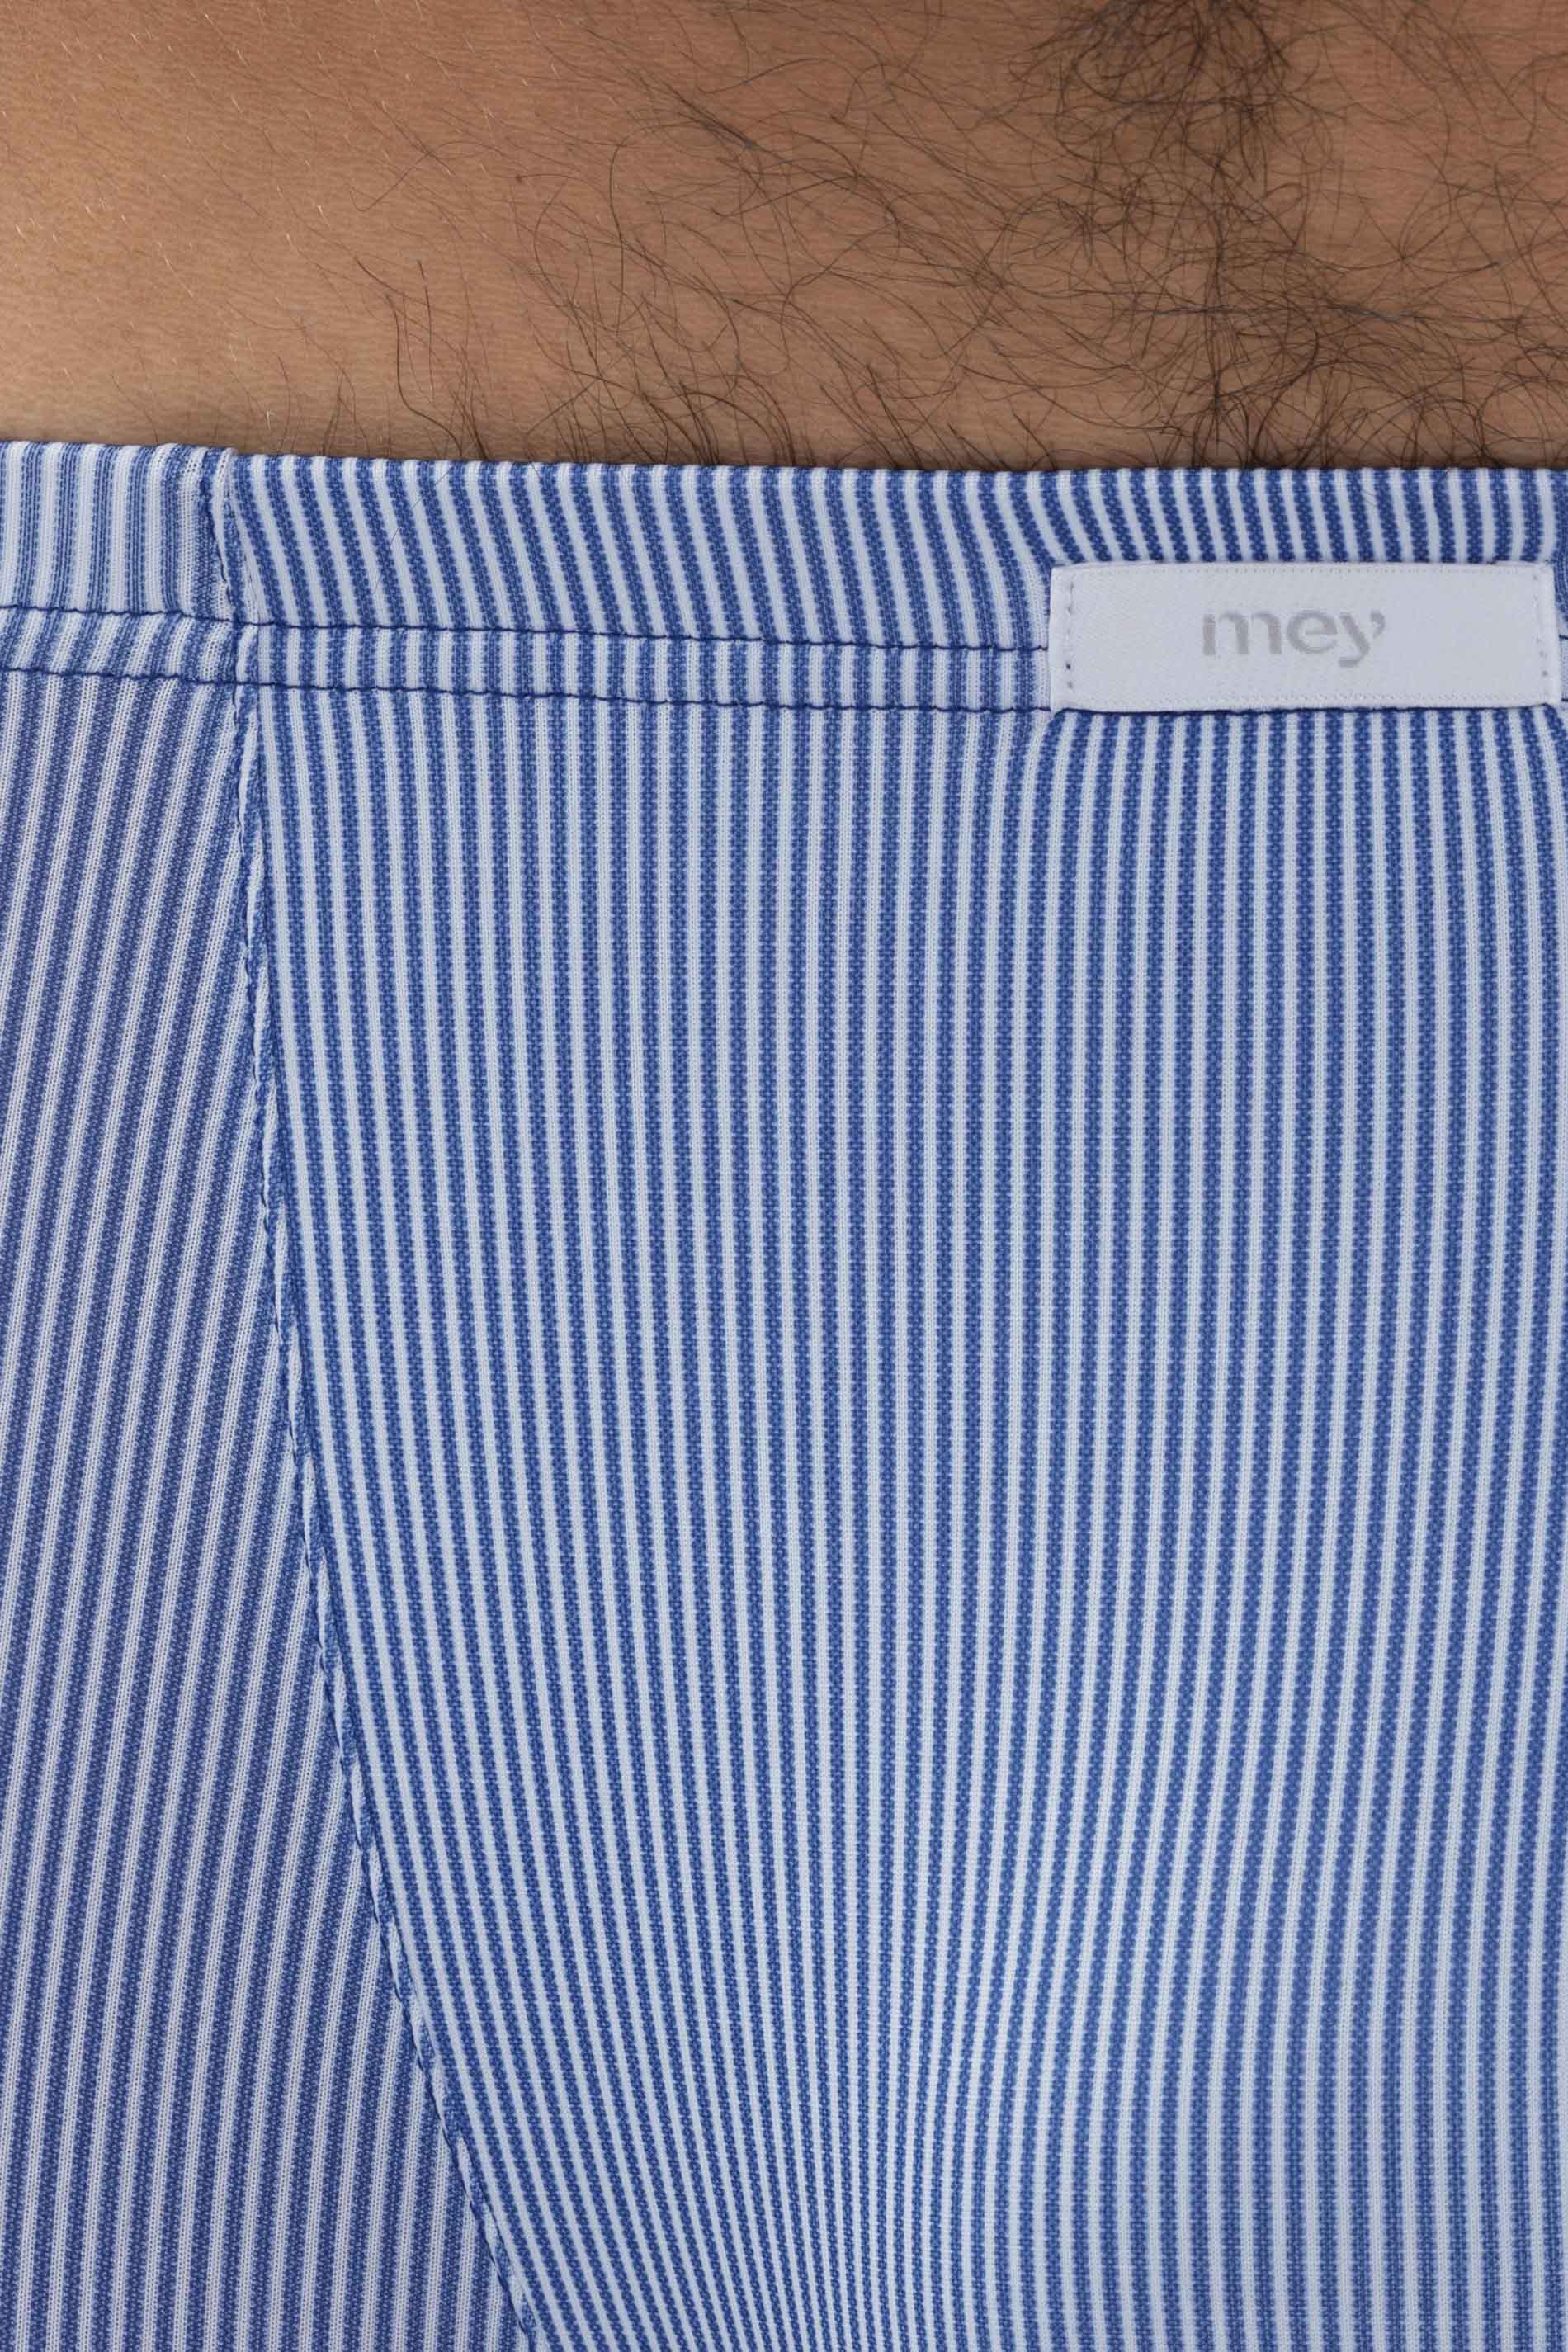 Shorty Serie Neddle Stripes Detail View 02 | mey®